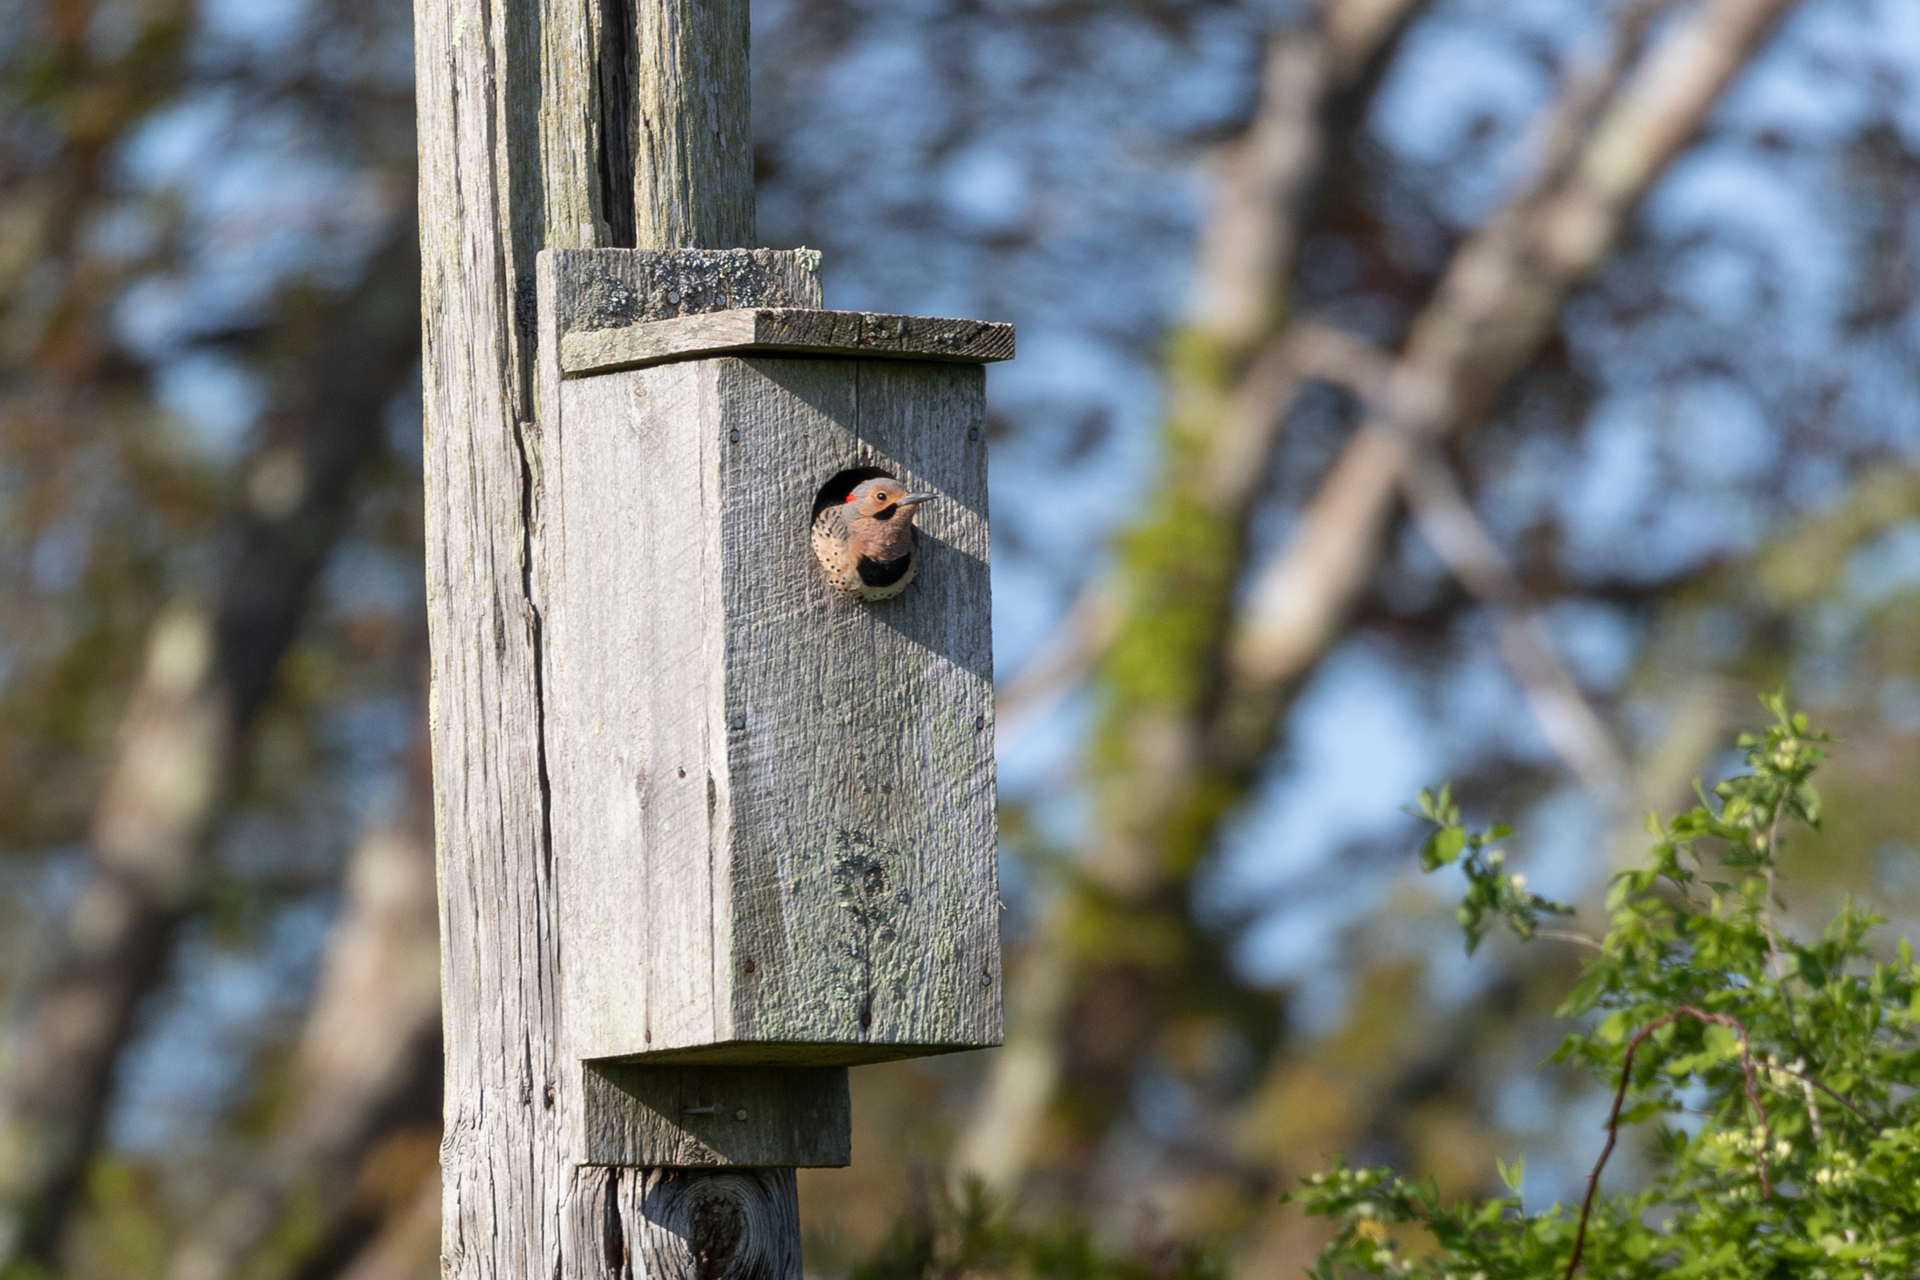 Northern Flicker at the entrance of a bird box